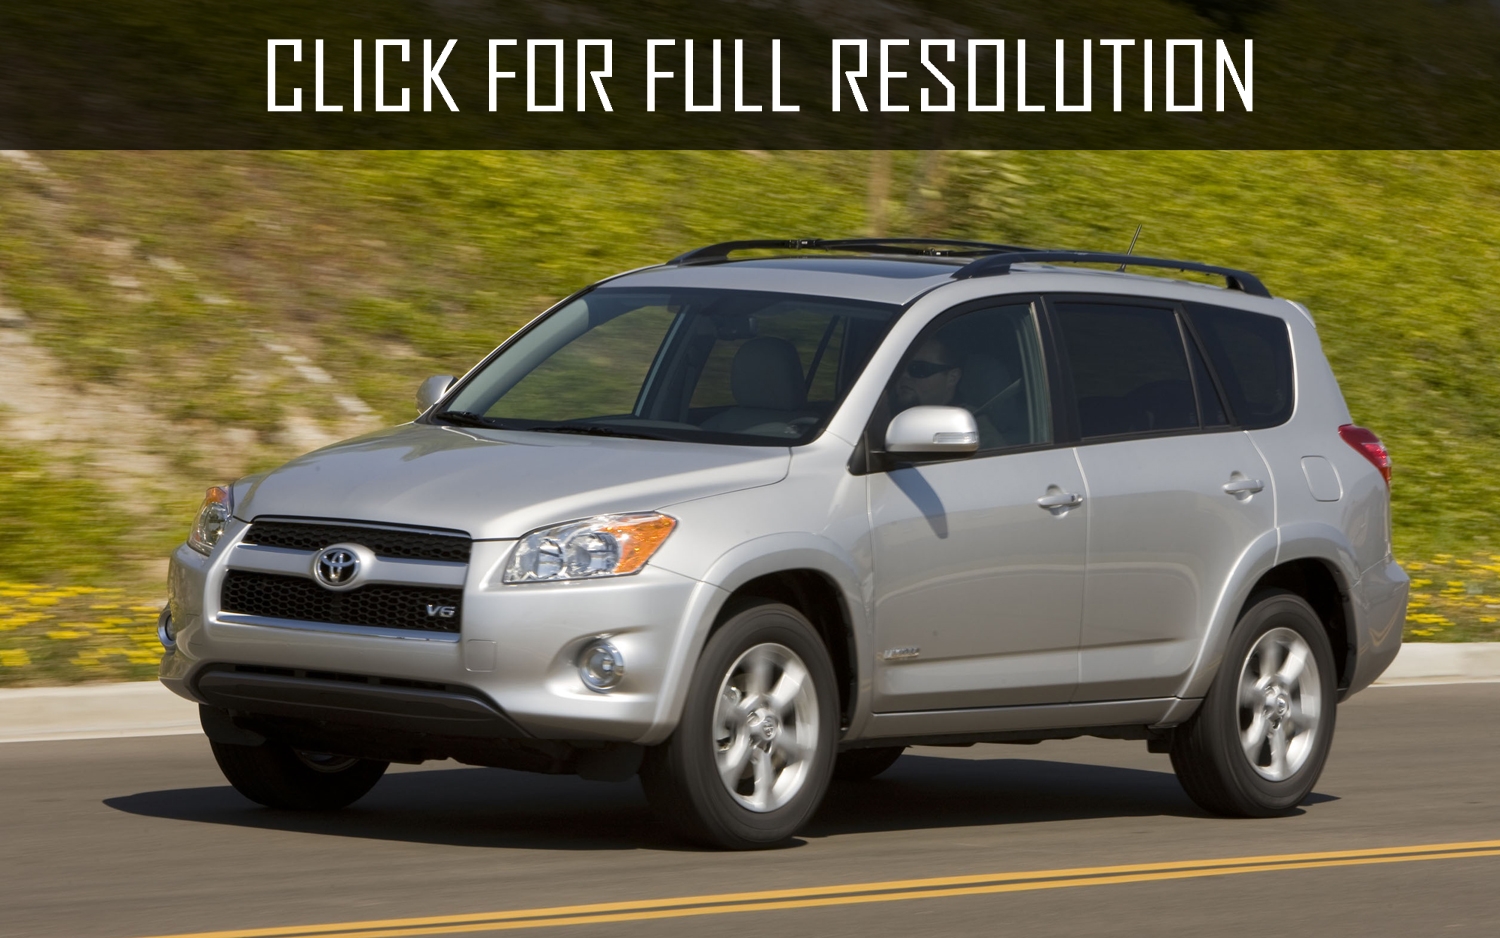 2012 Toyota Rav4 news, reviews, msrp, ratings with amazing images